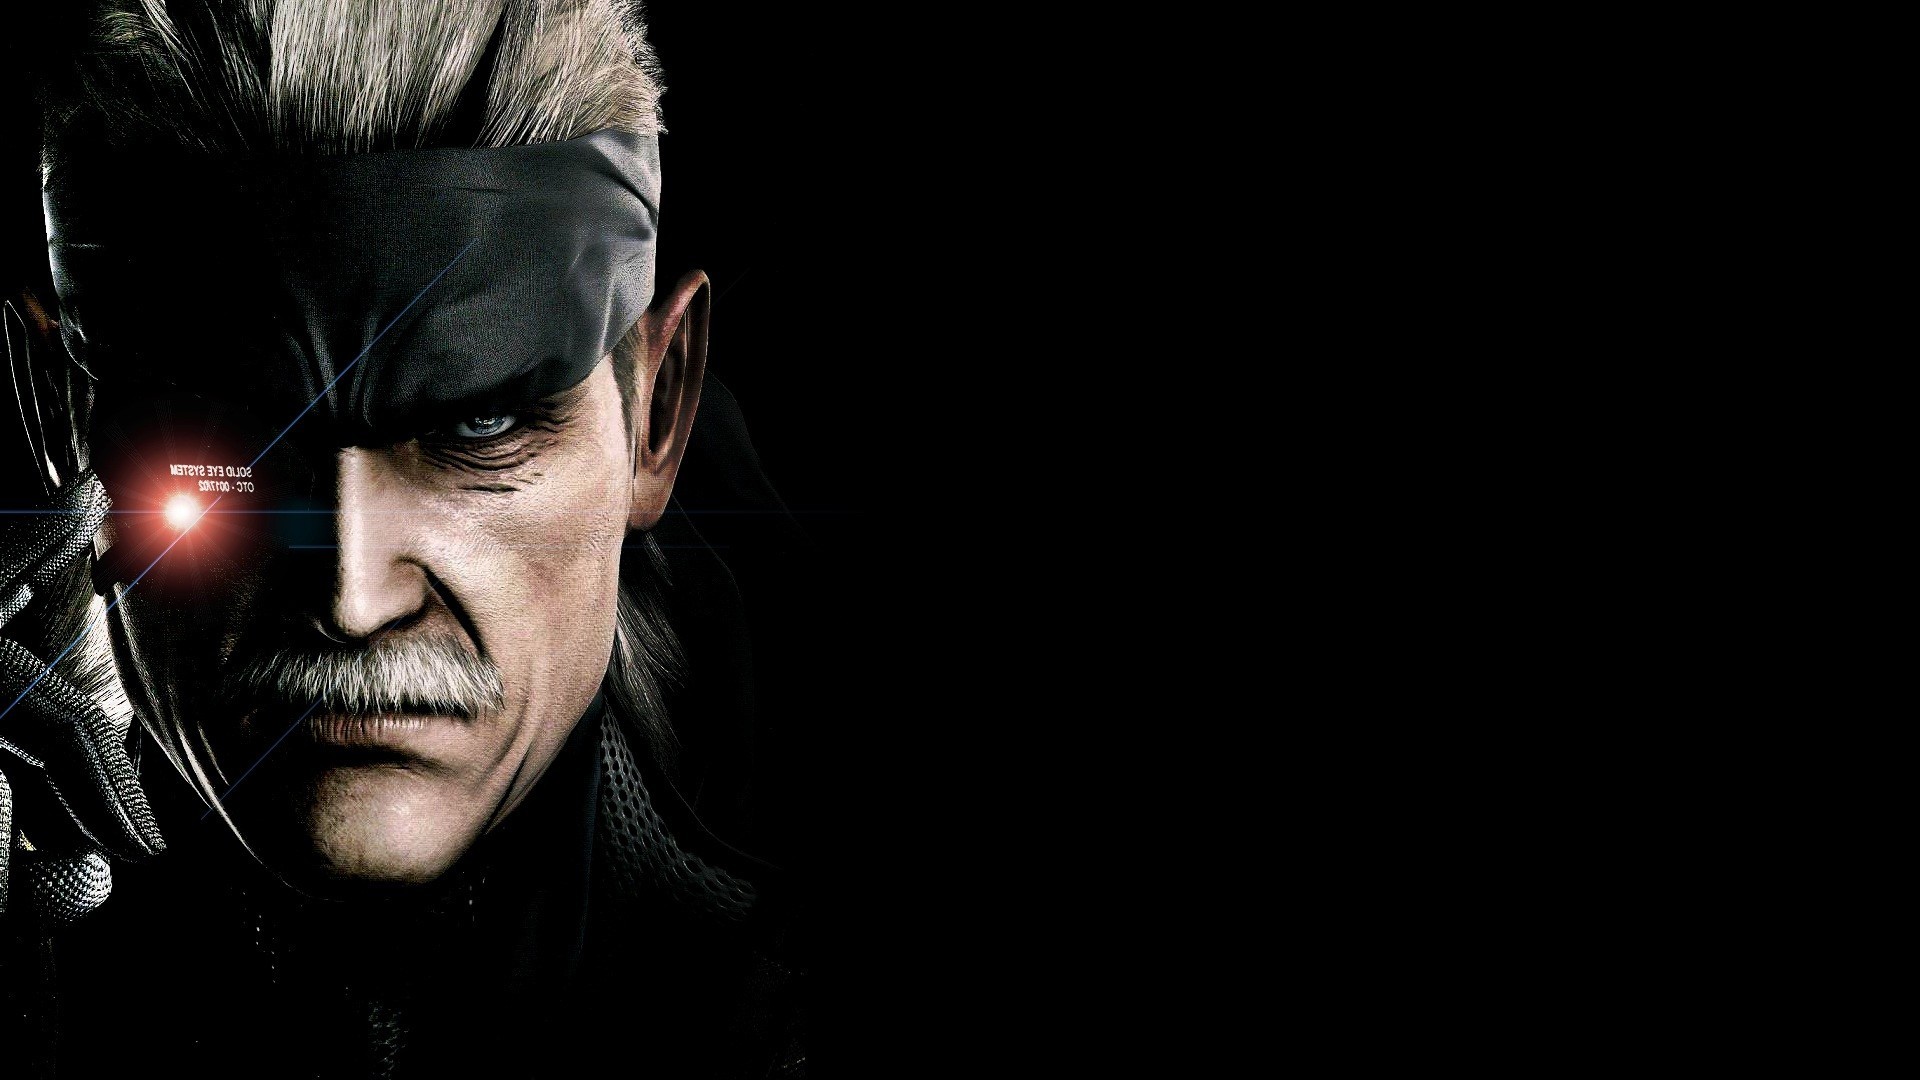 metal gear solid v phantom pain wallpaper #663 Picture Daily Update